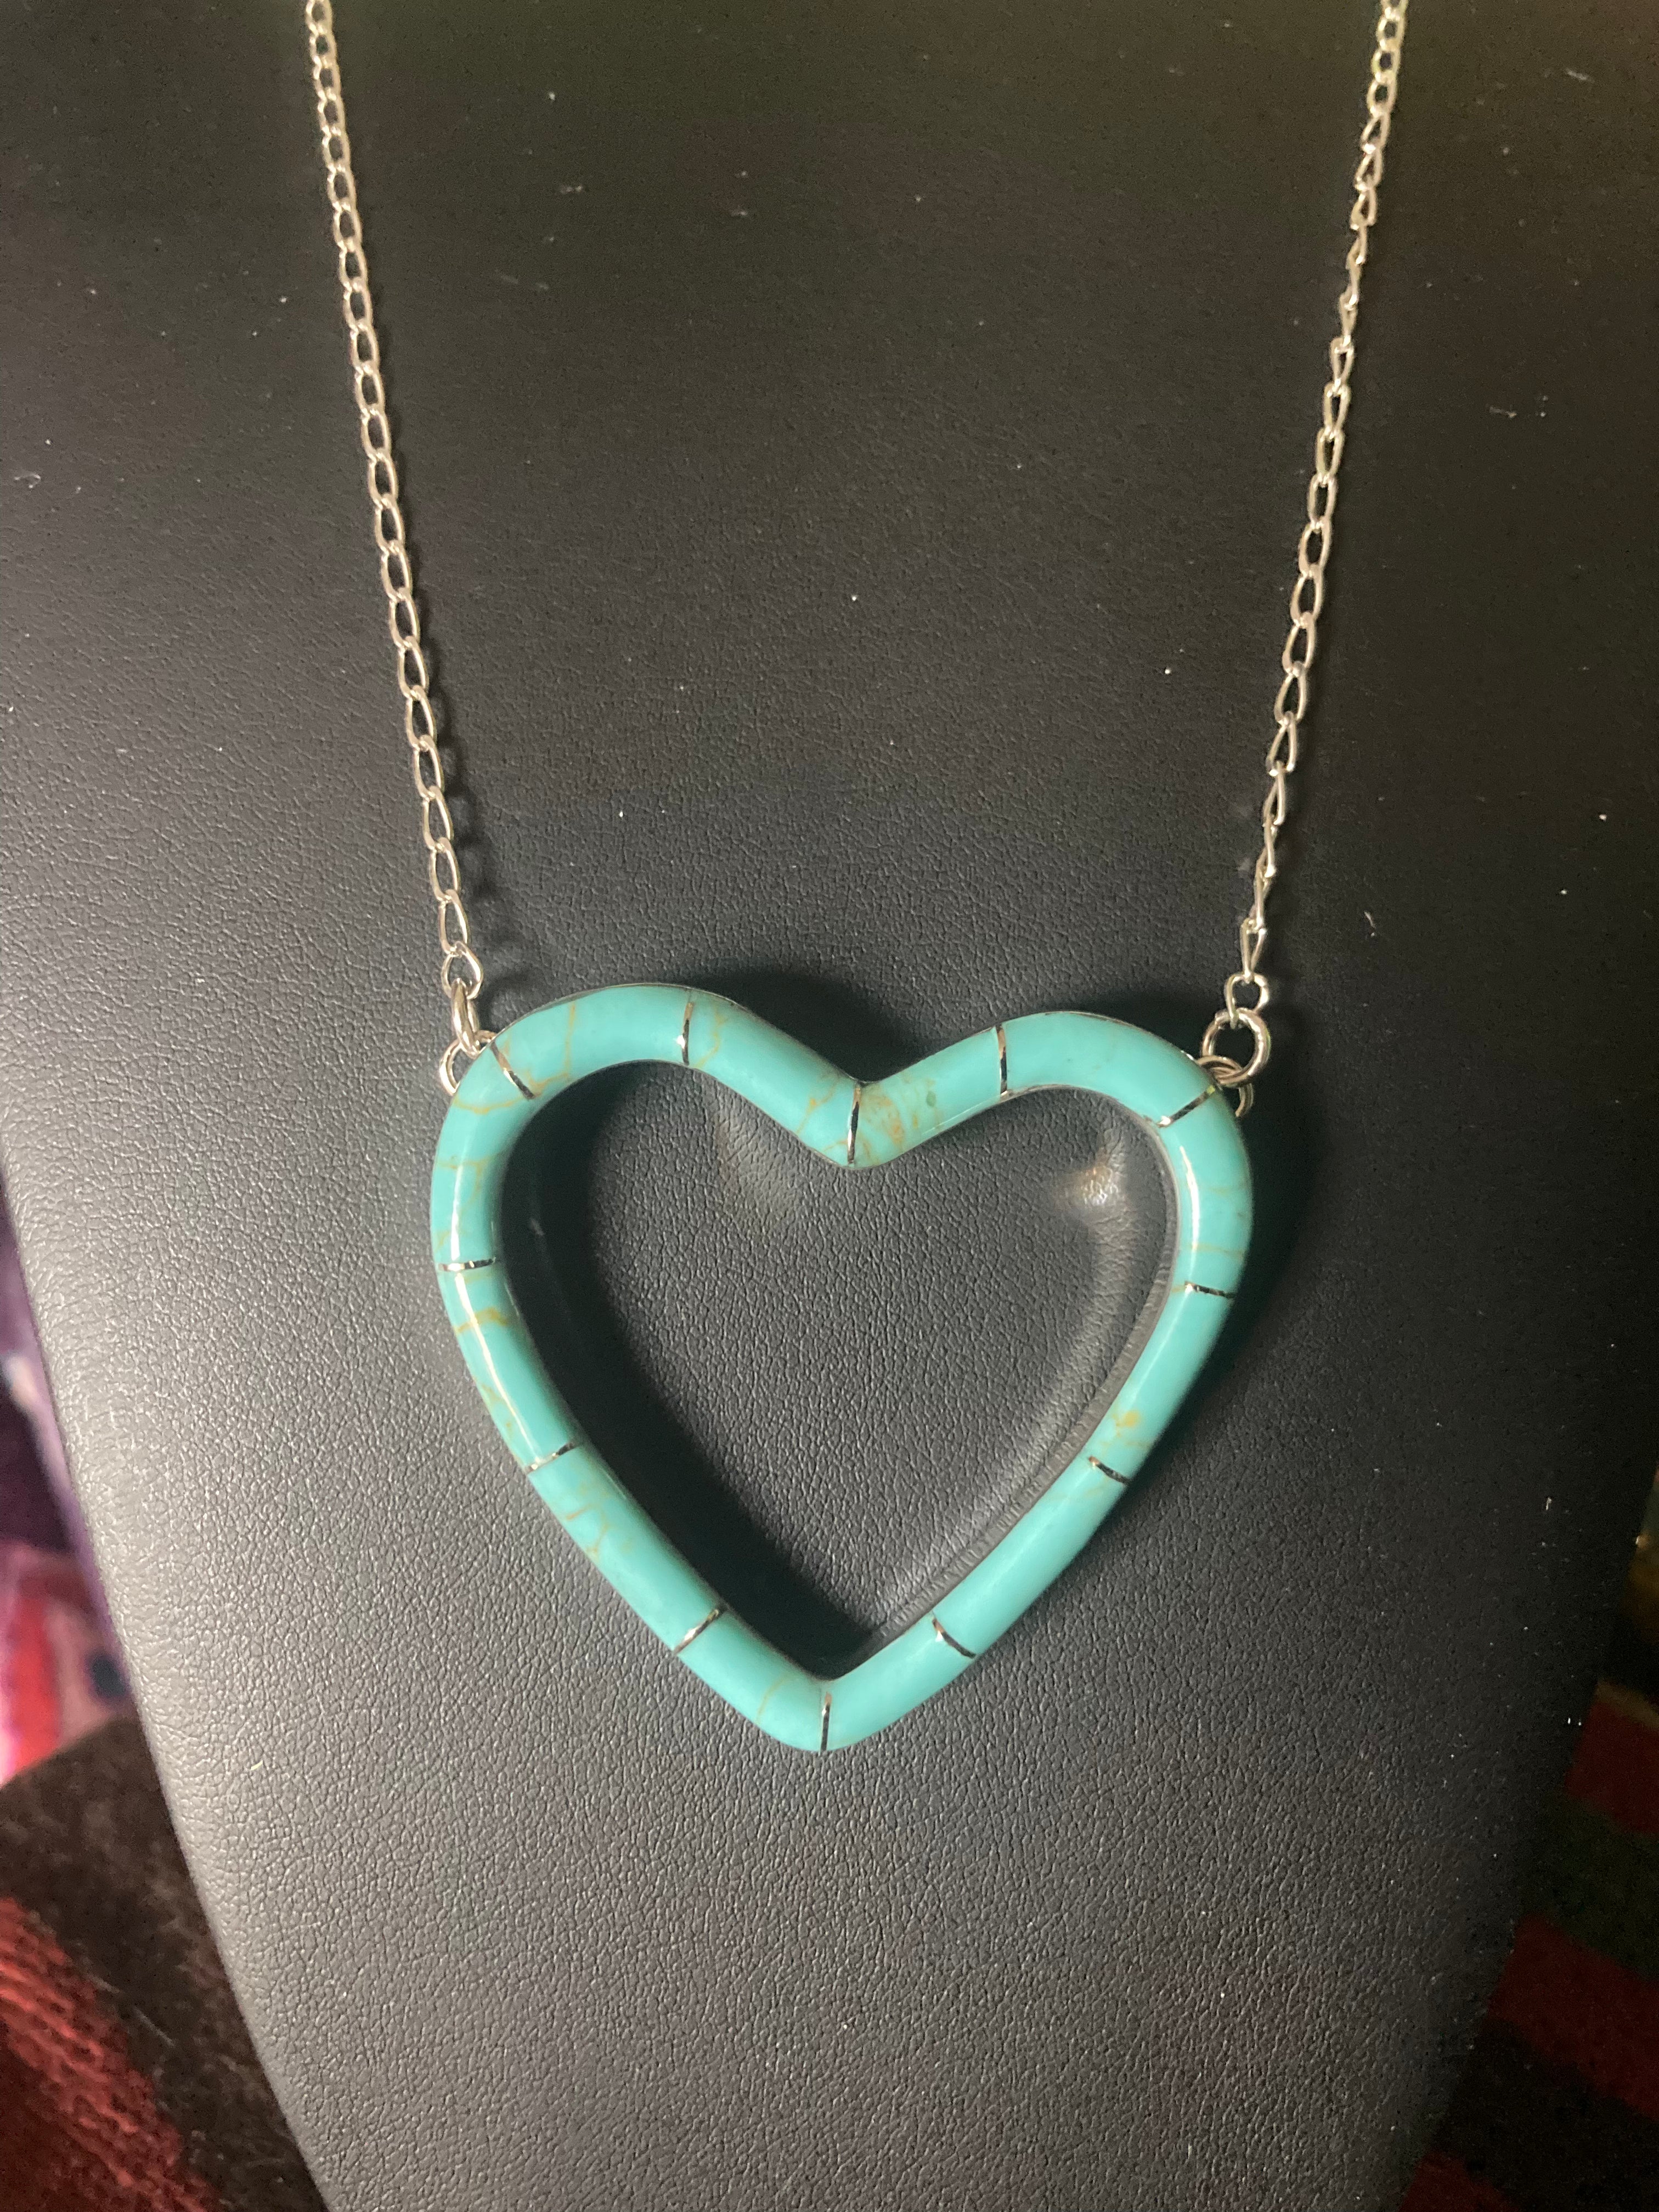 Handmade Sterling Silver Turquoise Heart Necklace PSTPN05